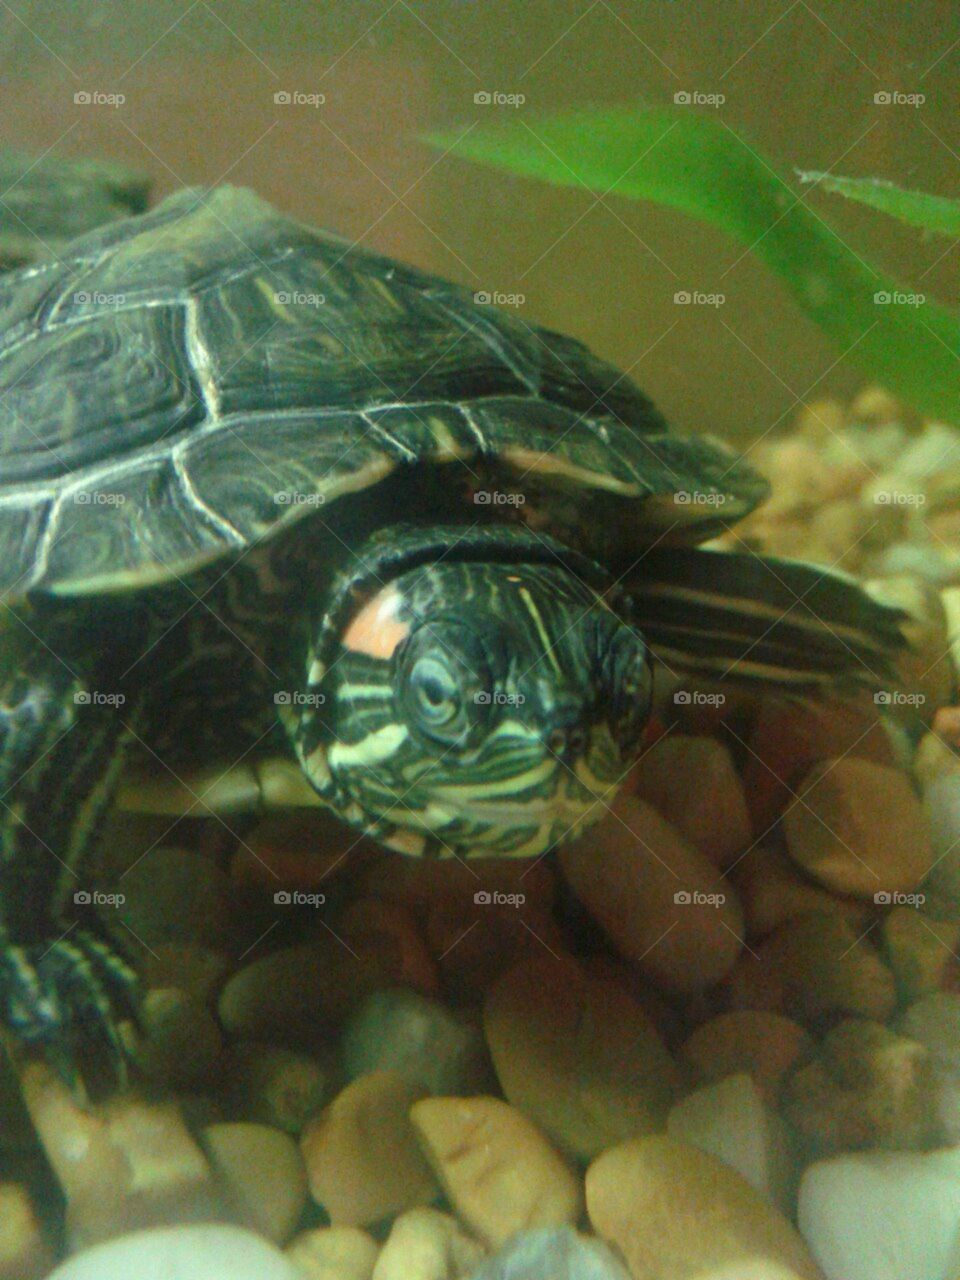 Sally. My pet turtle Sally. I set her free shortly after this was taken.